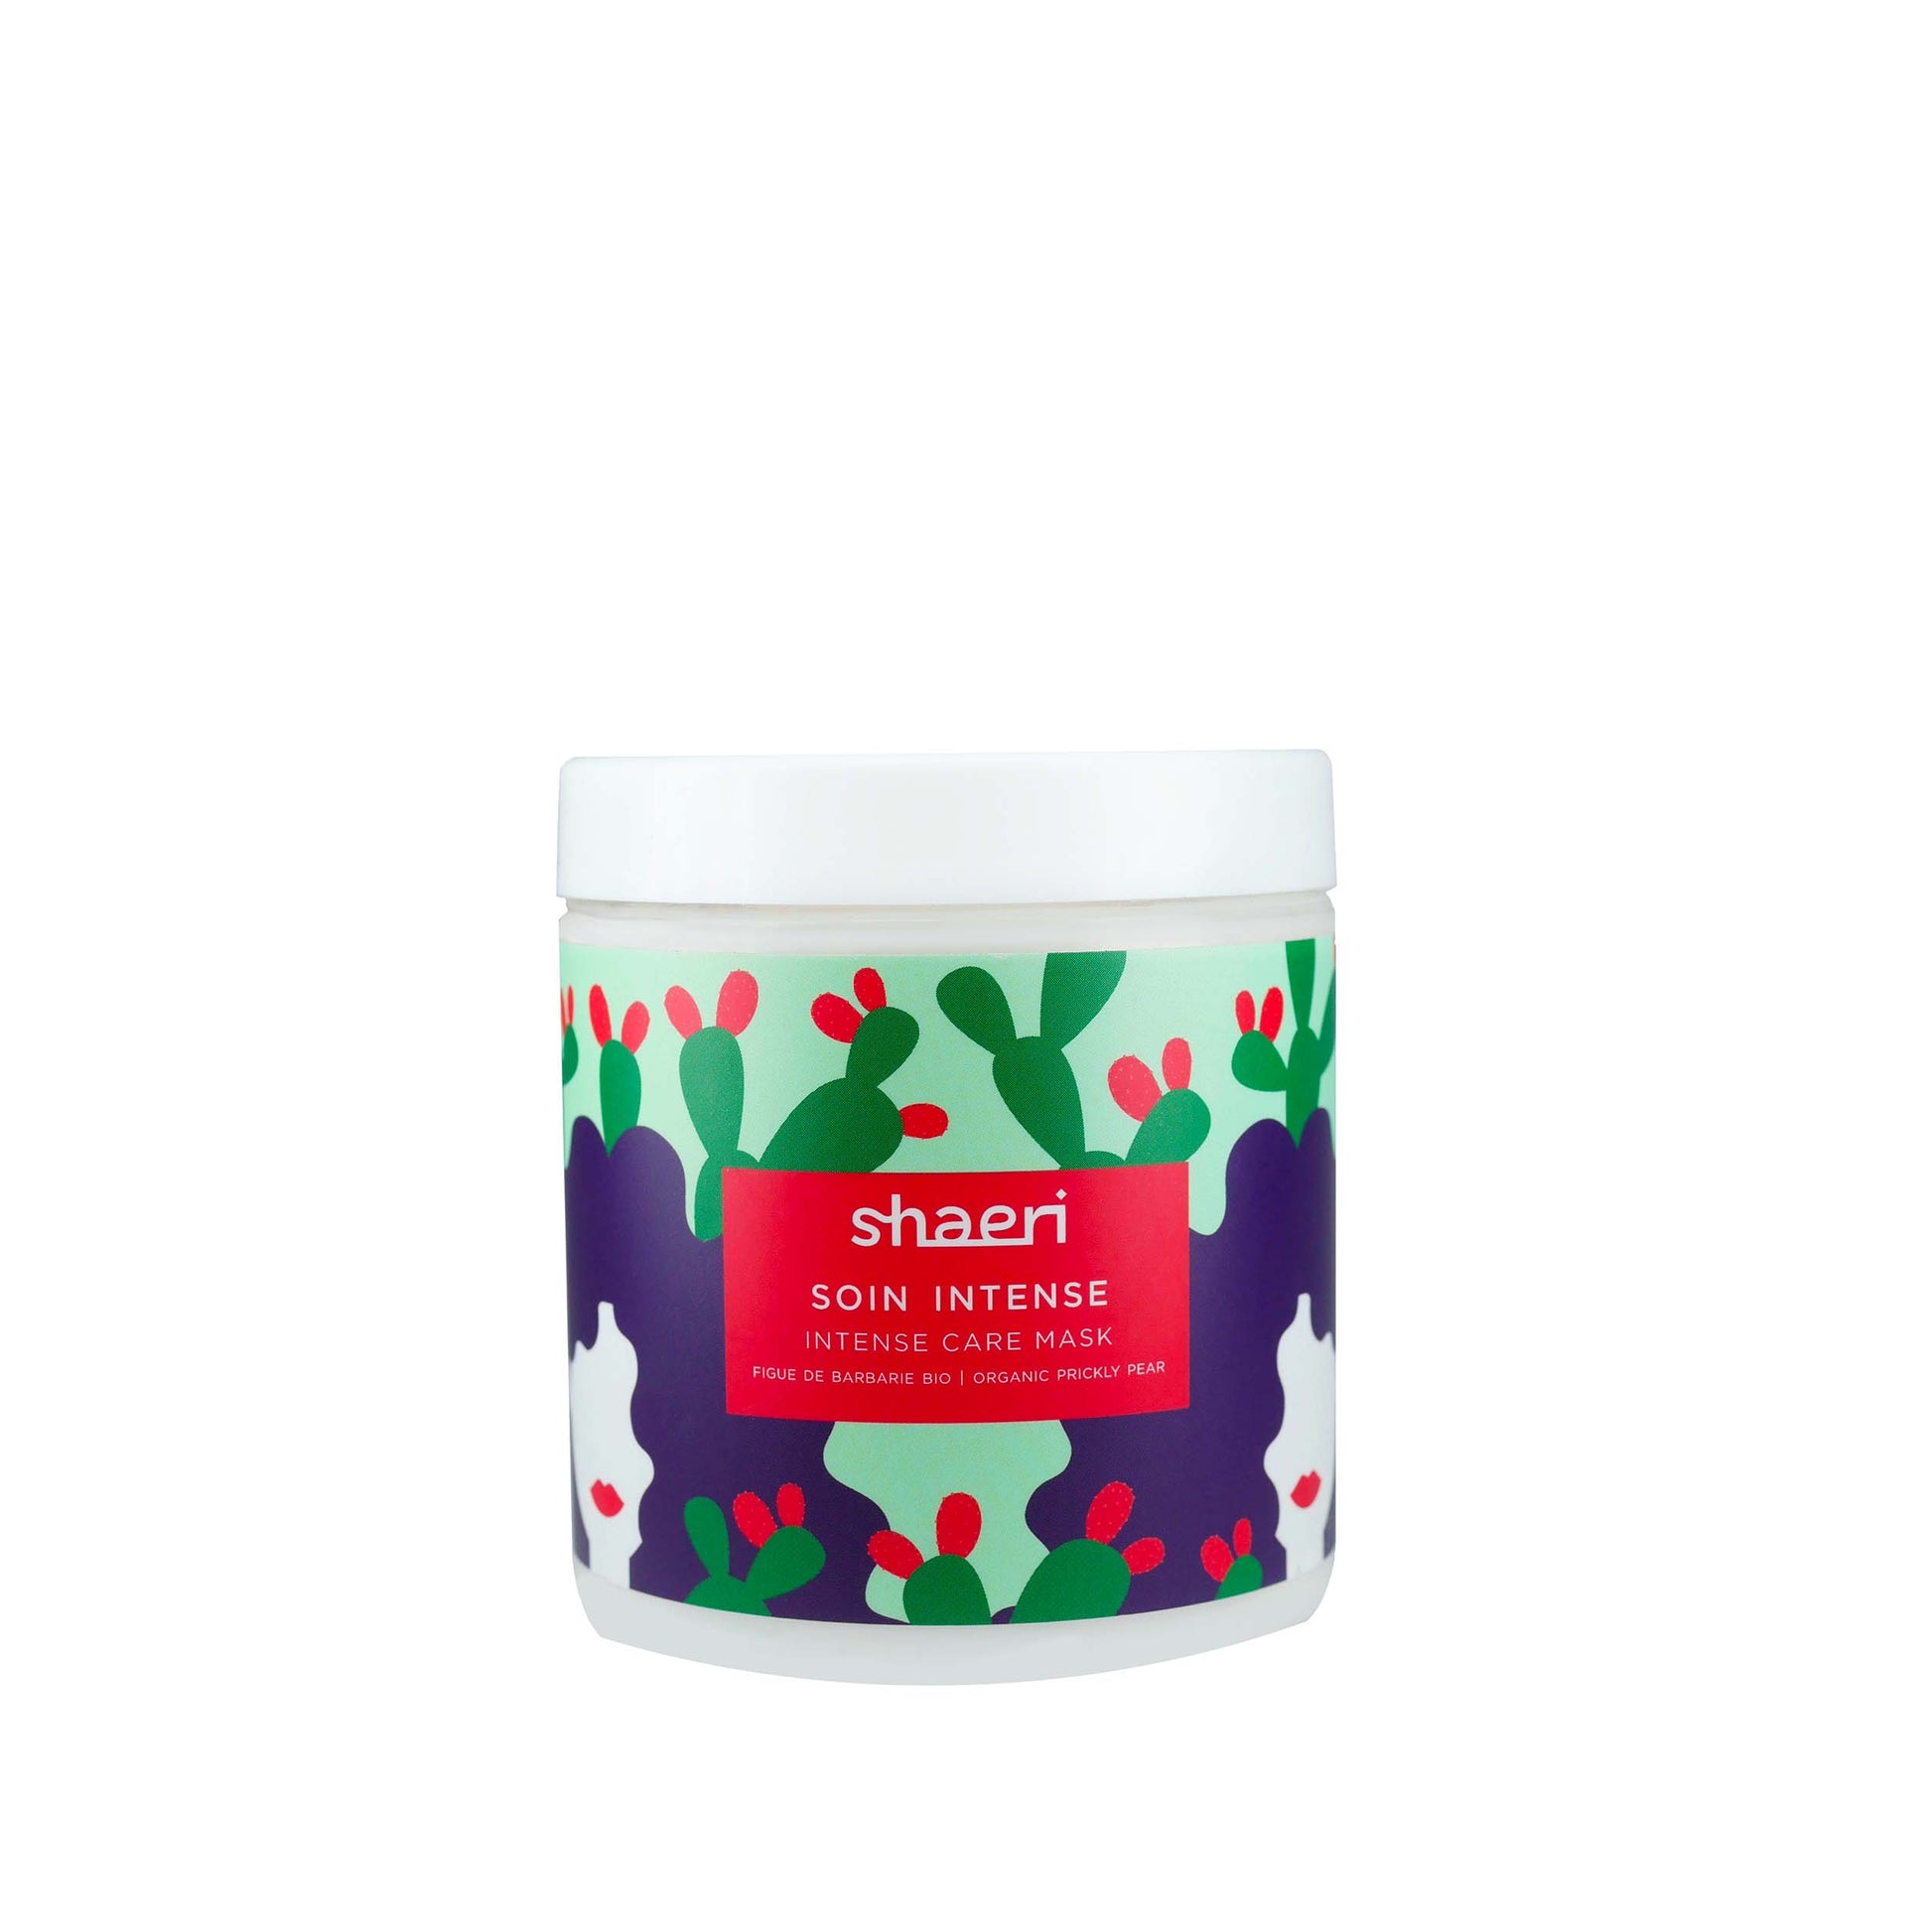 haircare mask enriched with prickly pear to nourish and moisturize the hair